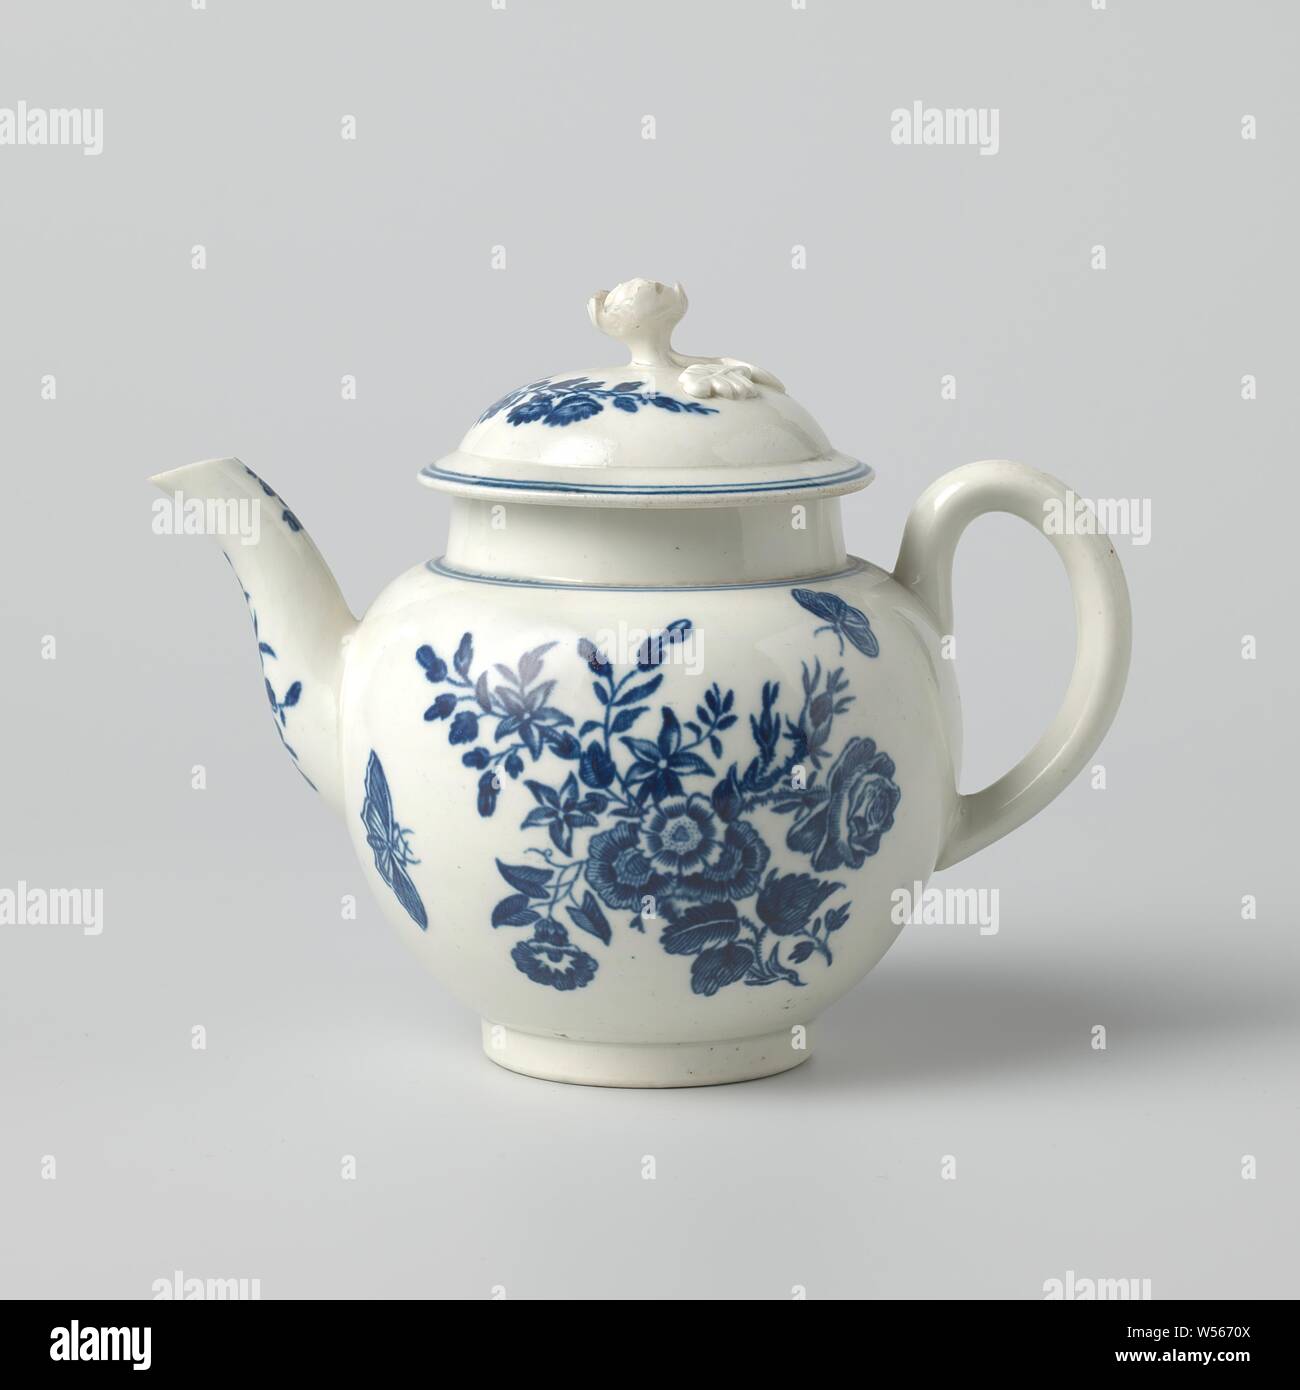 Drawing pot with painted flowers and insects, Drawing pot of porcelain, painted with blue flowers and insects on white ground. Marked with letter L., Langley, Langley Mill, 1790 - 1800, porcelain (material), w 16.0 cm × d 10.1 cm × h 9.8 cm Stock Photo